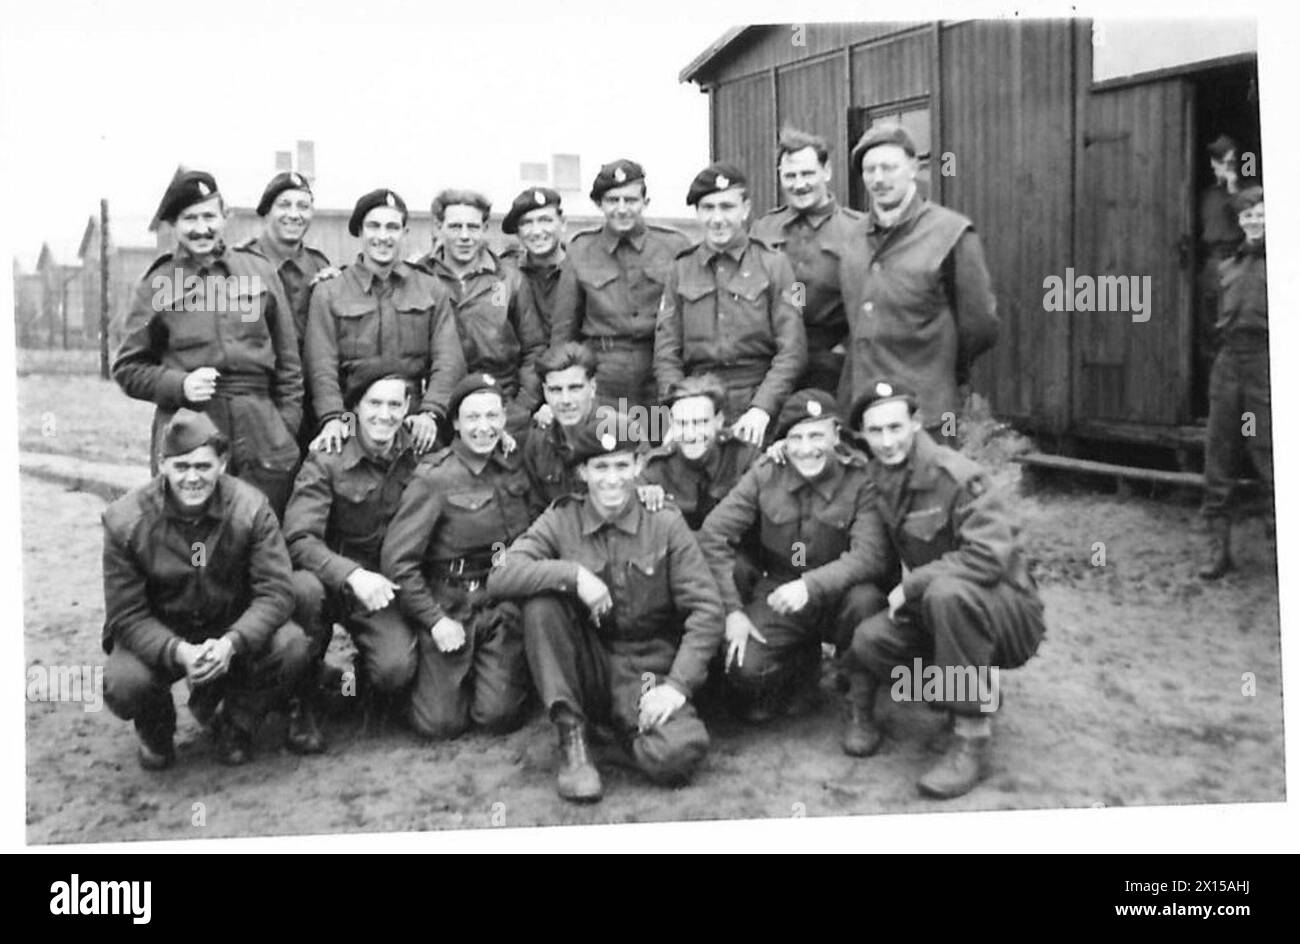 BRITISH TROOPS OVERRUN NEW P.O.W. & POLITICAL PRISONER CAMP AT SANDBOSTEL - Men of the 7th and 11th Armoured Division British Army, 21st Army Group Stock Photo